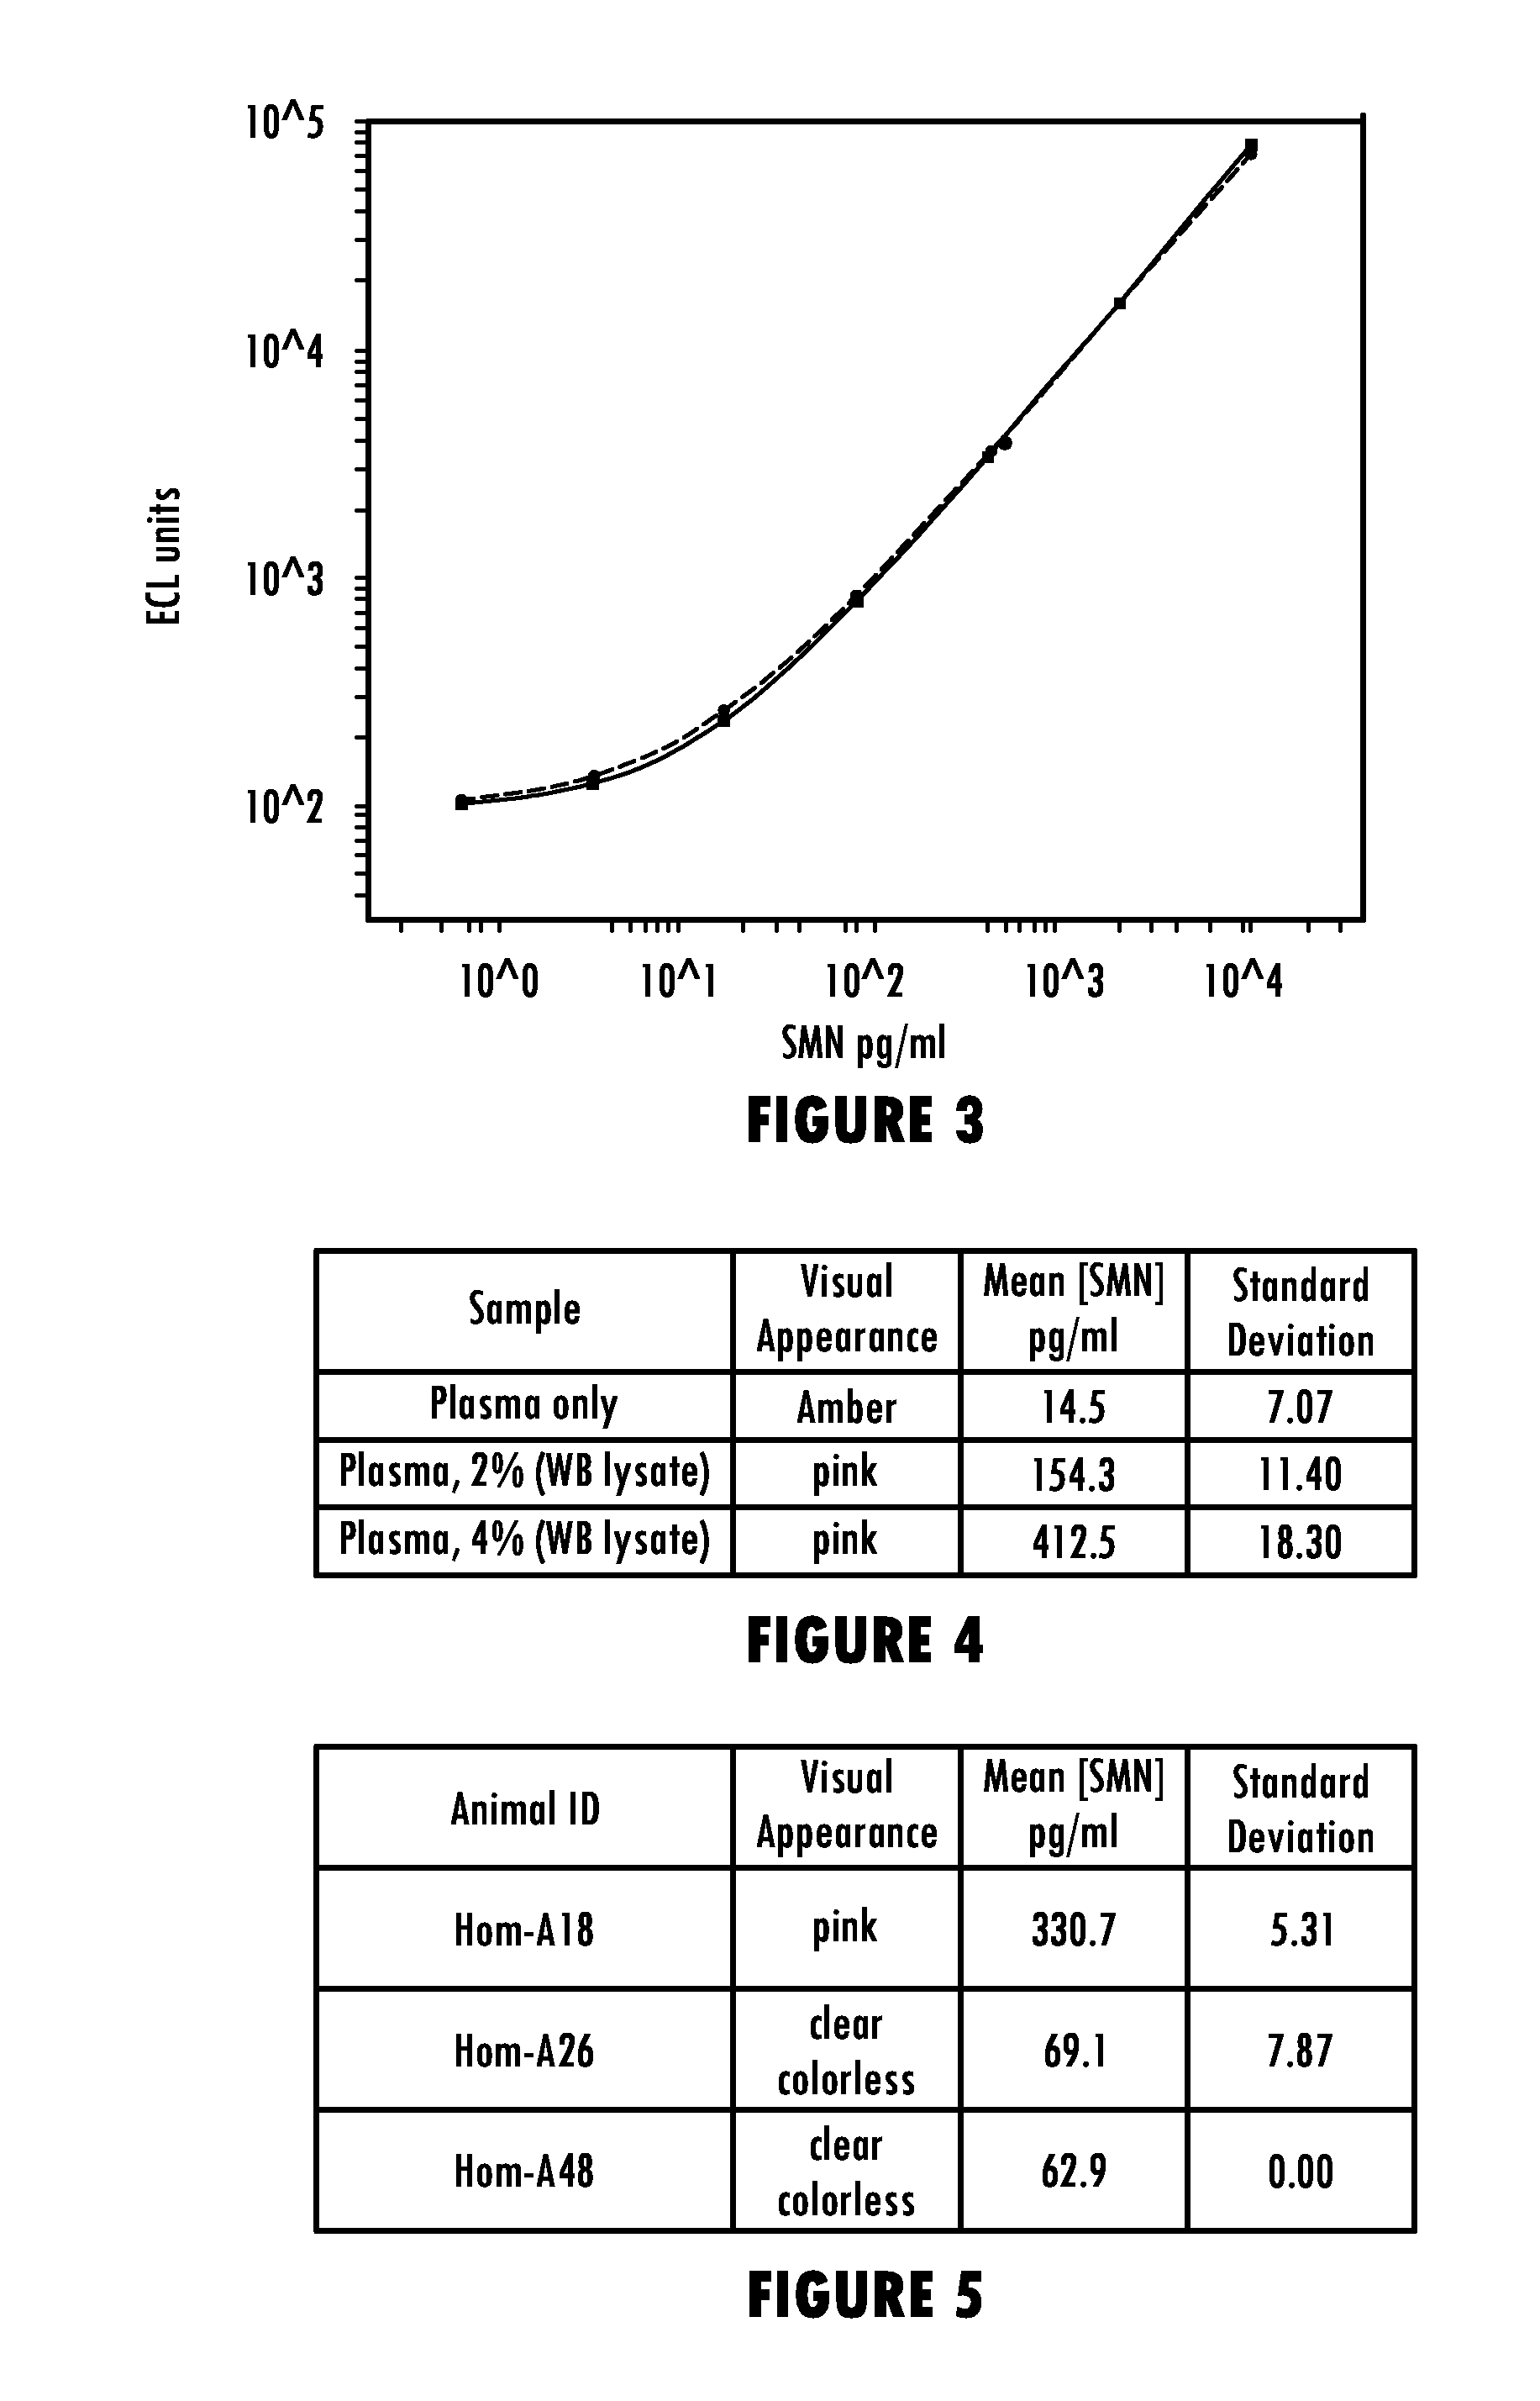 Methods for Detecting Survival Motor Neuron (SMN) Protein in Whole Blood or Cerebral Spinal Fluid